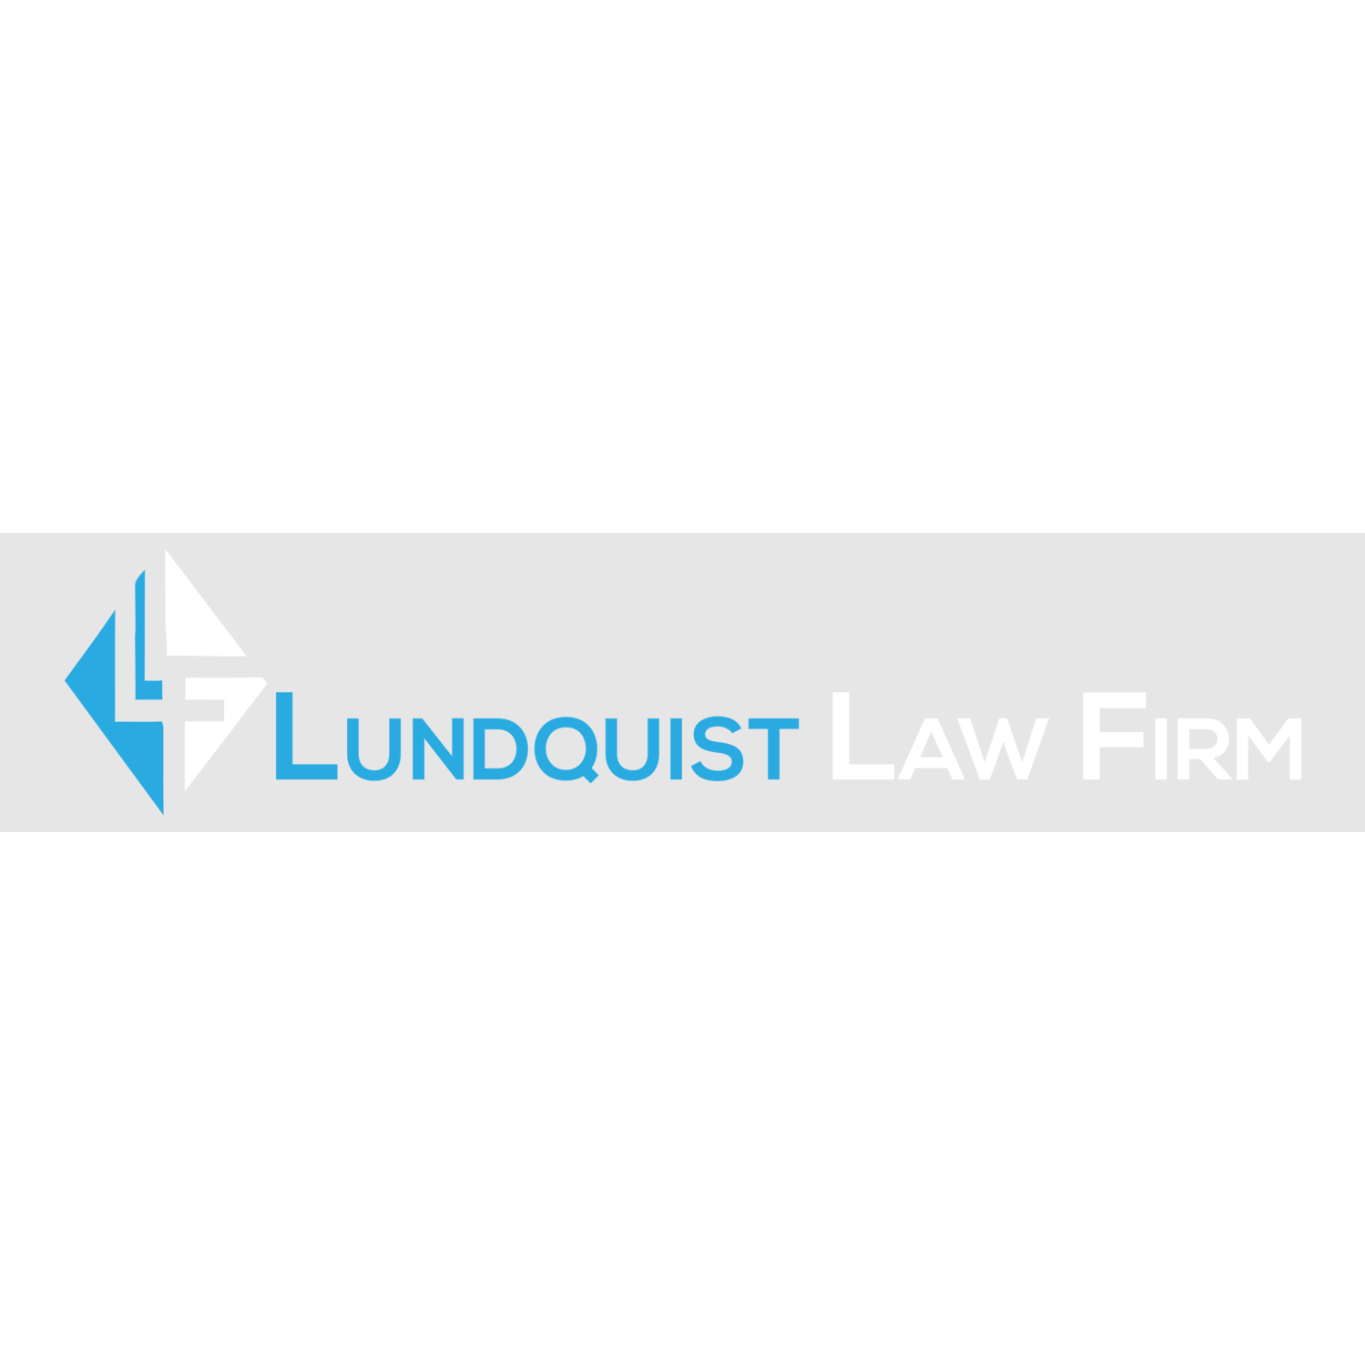 Company logo of Lundquist Law Firm